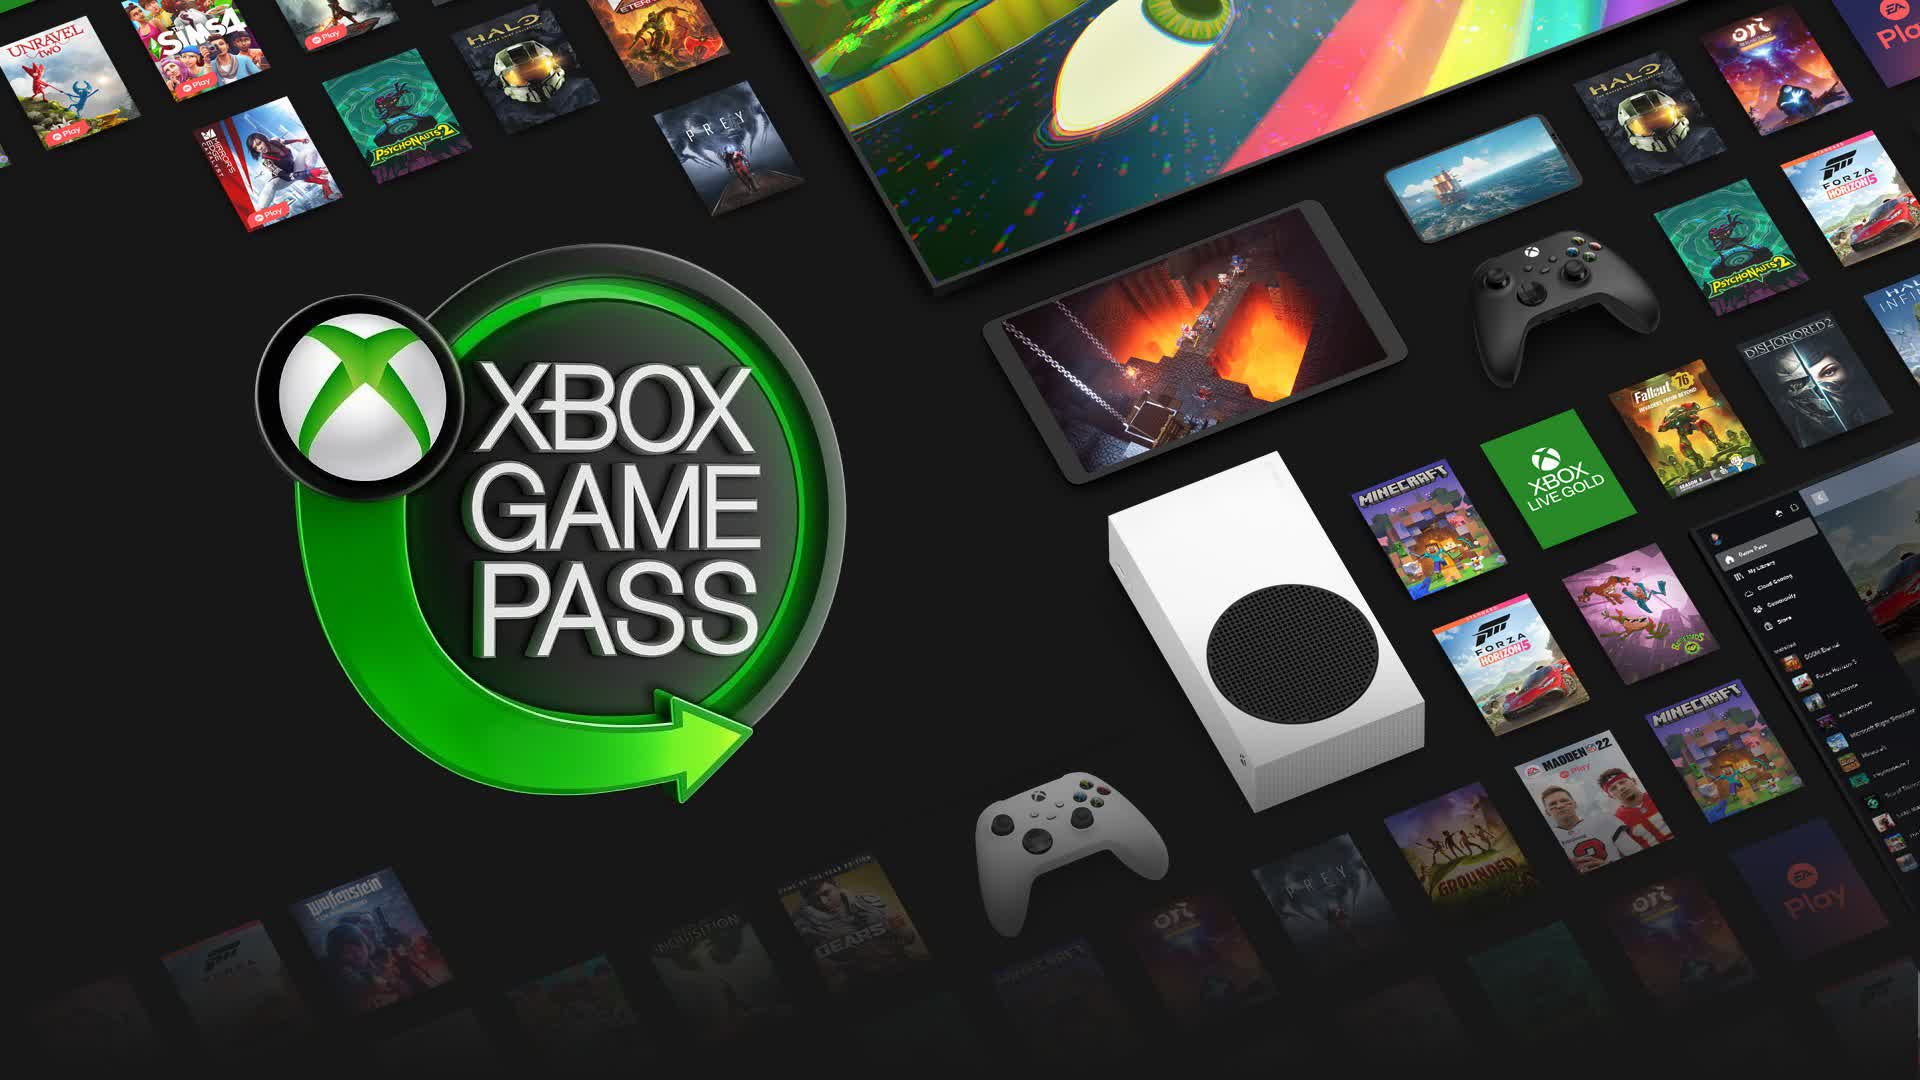 Internal Microsoft documents and analysis indicate Game Pass cannibalizes sales